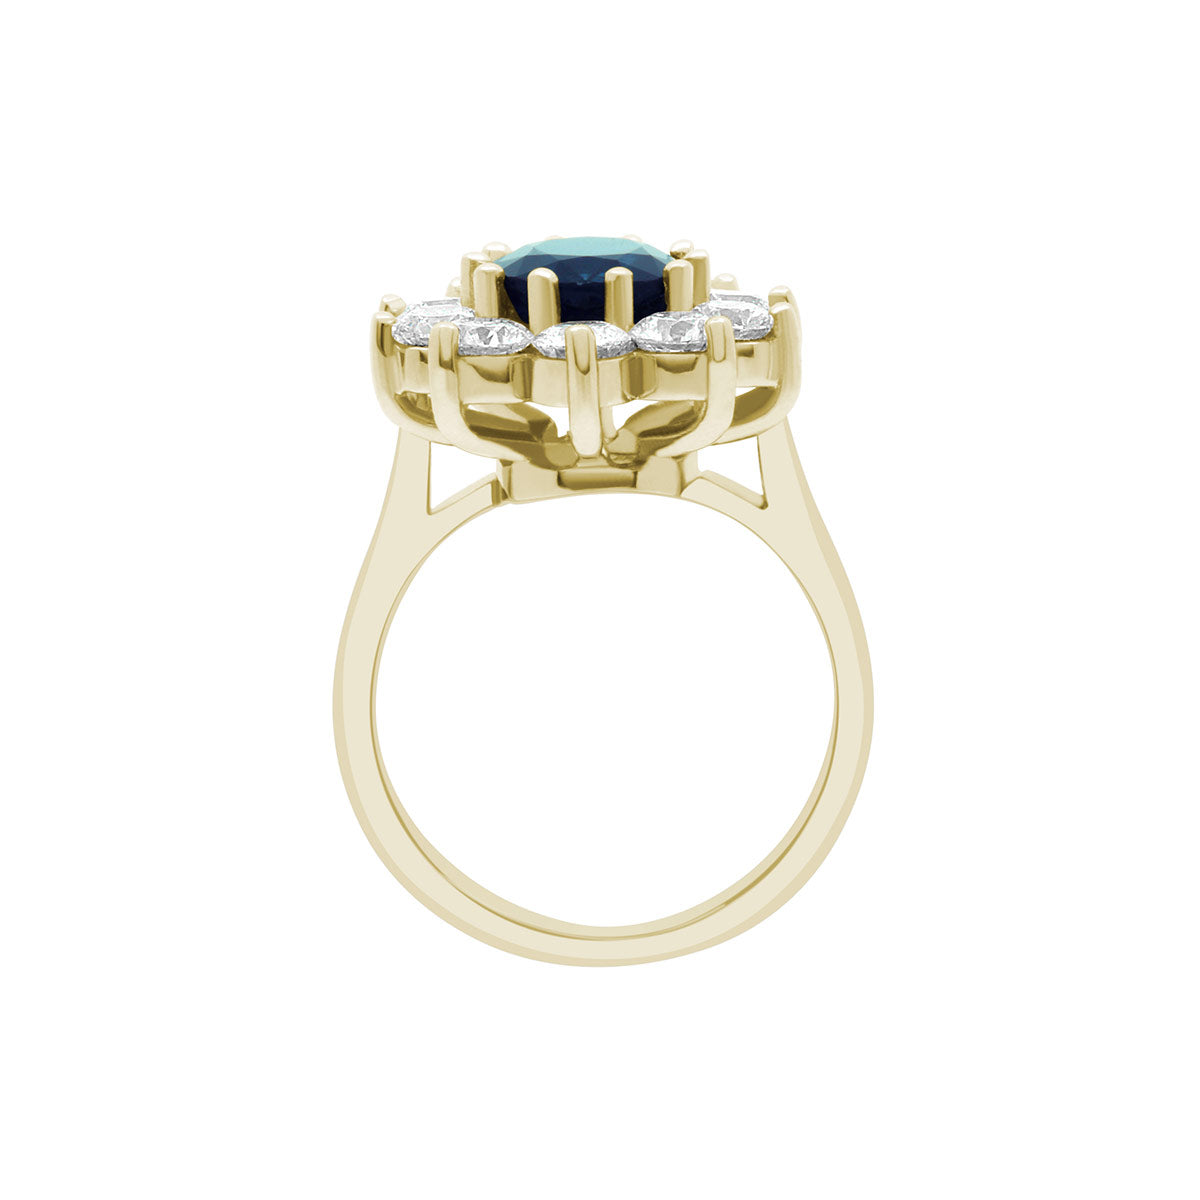 Sapphire Engagement Ring in yellow gold with a cluster of sparkling white diamonds in an upright position